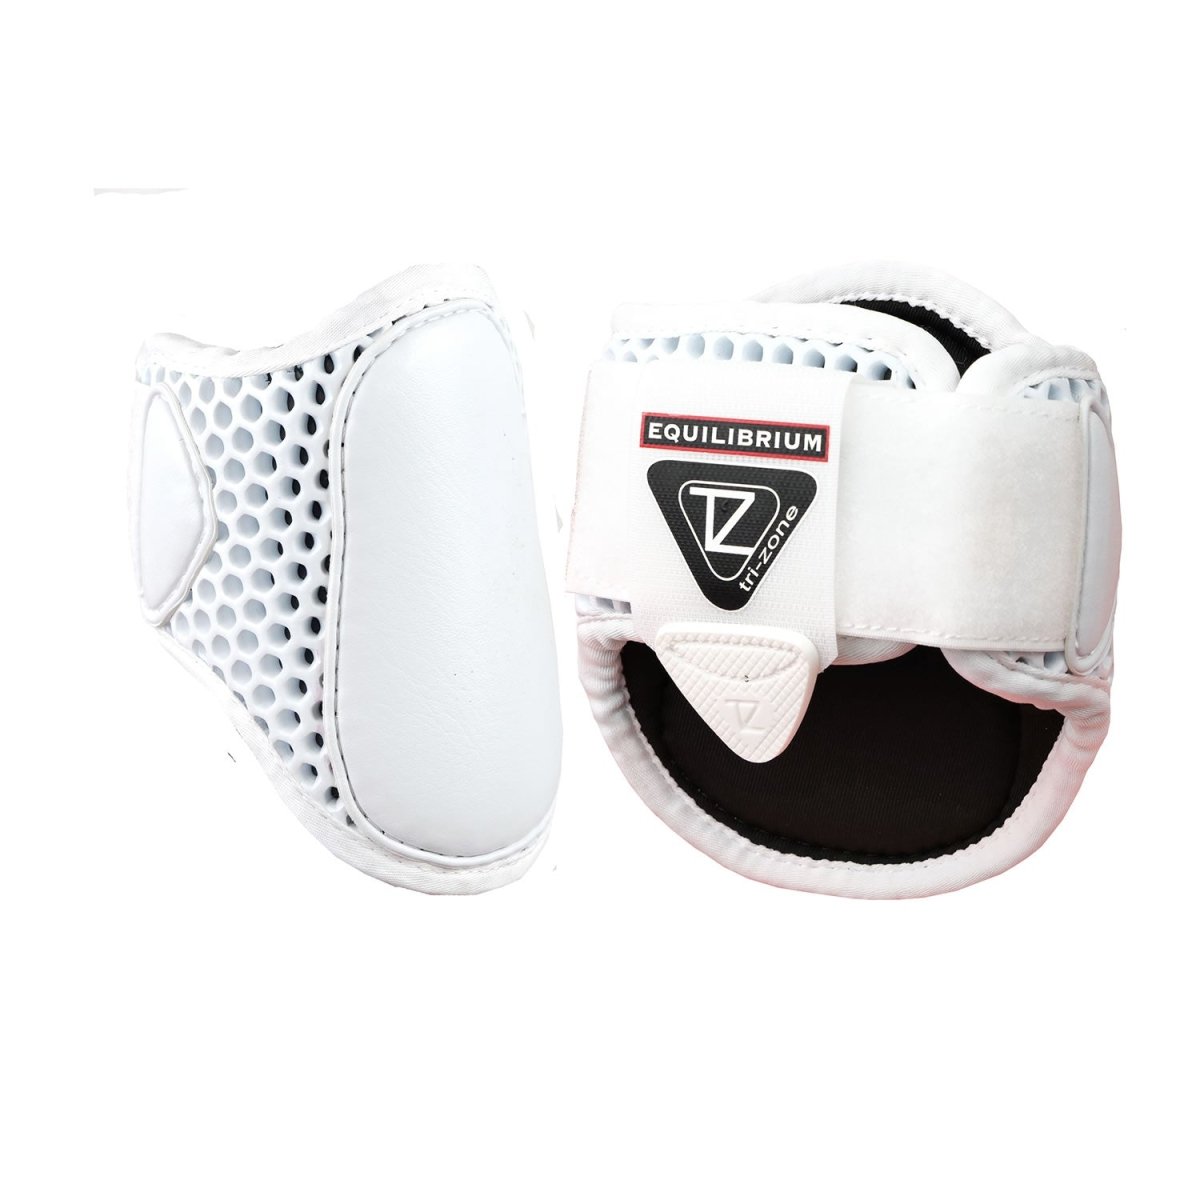 Equilibrium Tri-Zone Fetlock Boots - White - Extra Small